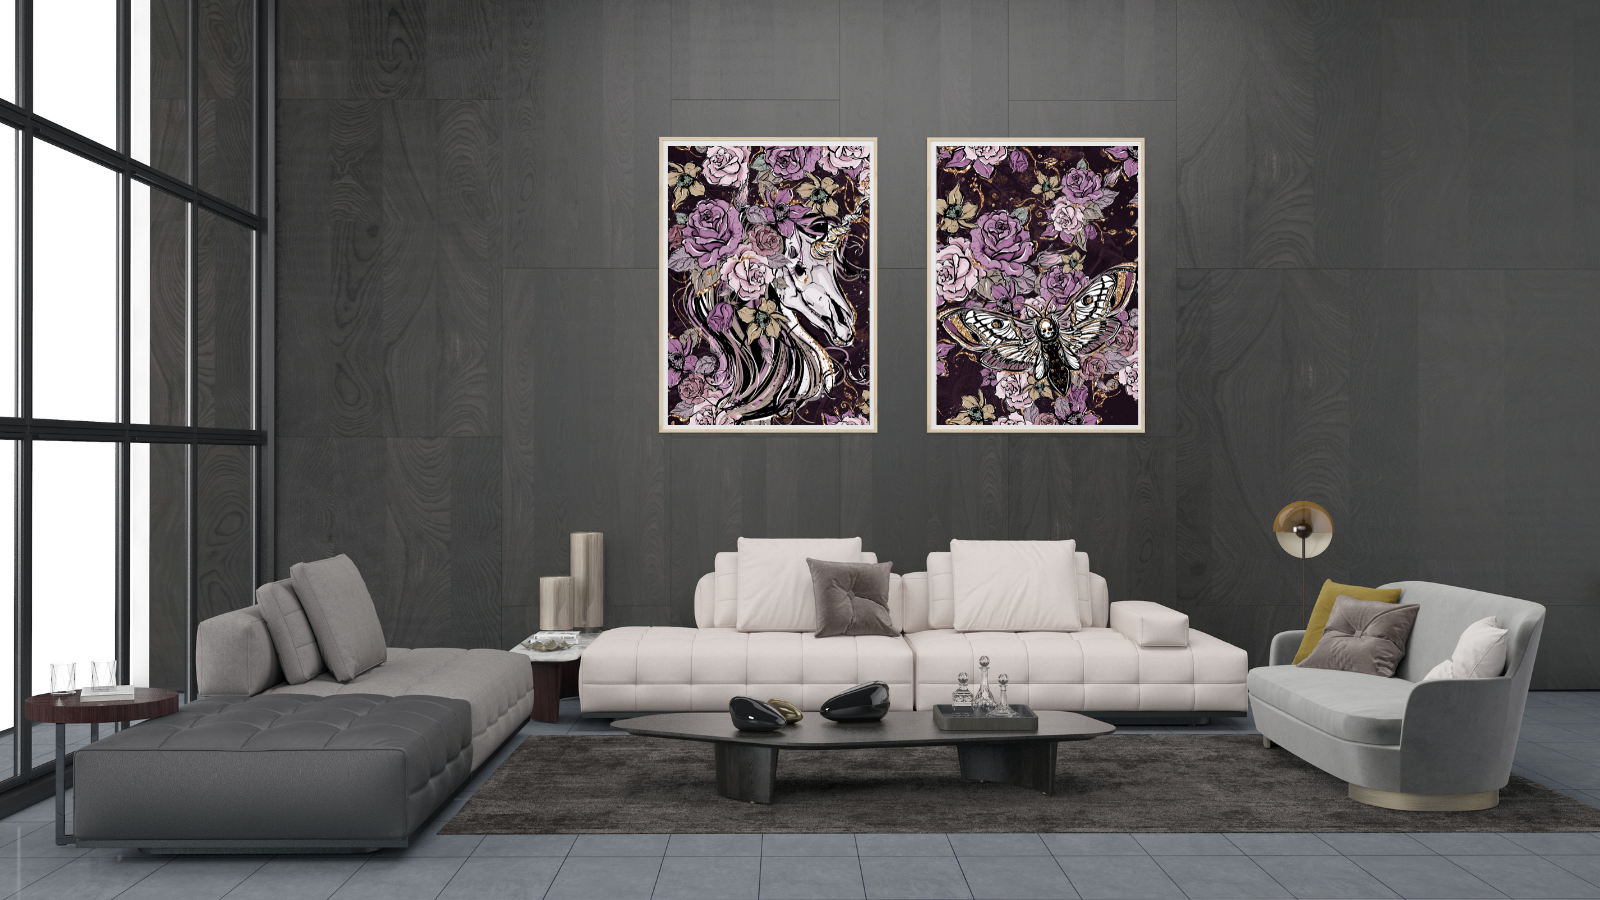 Two posters of unicorns floral and dead head moths in purple hug on a wall in a Livingroom